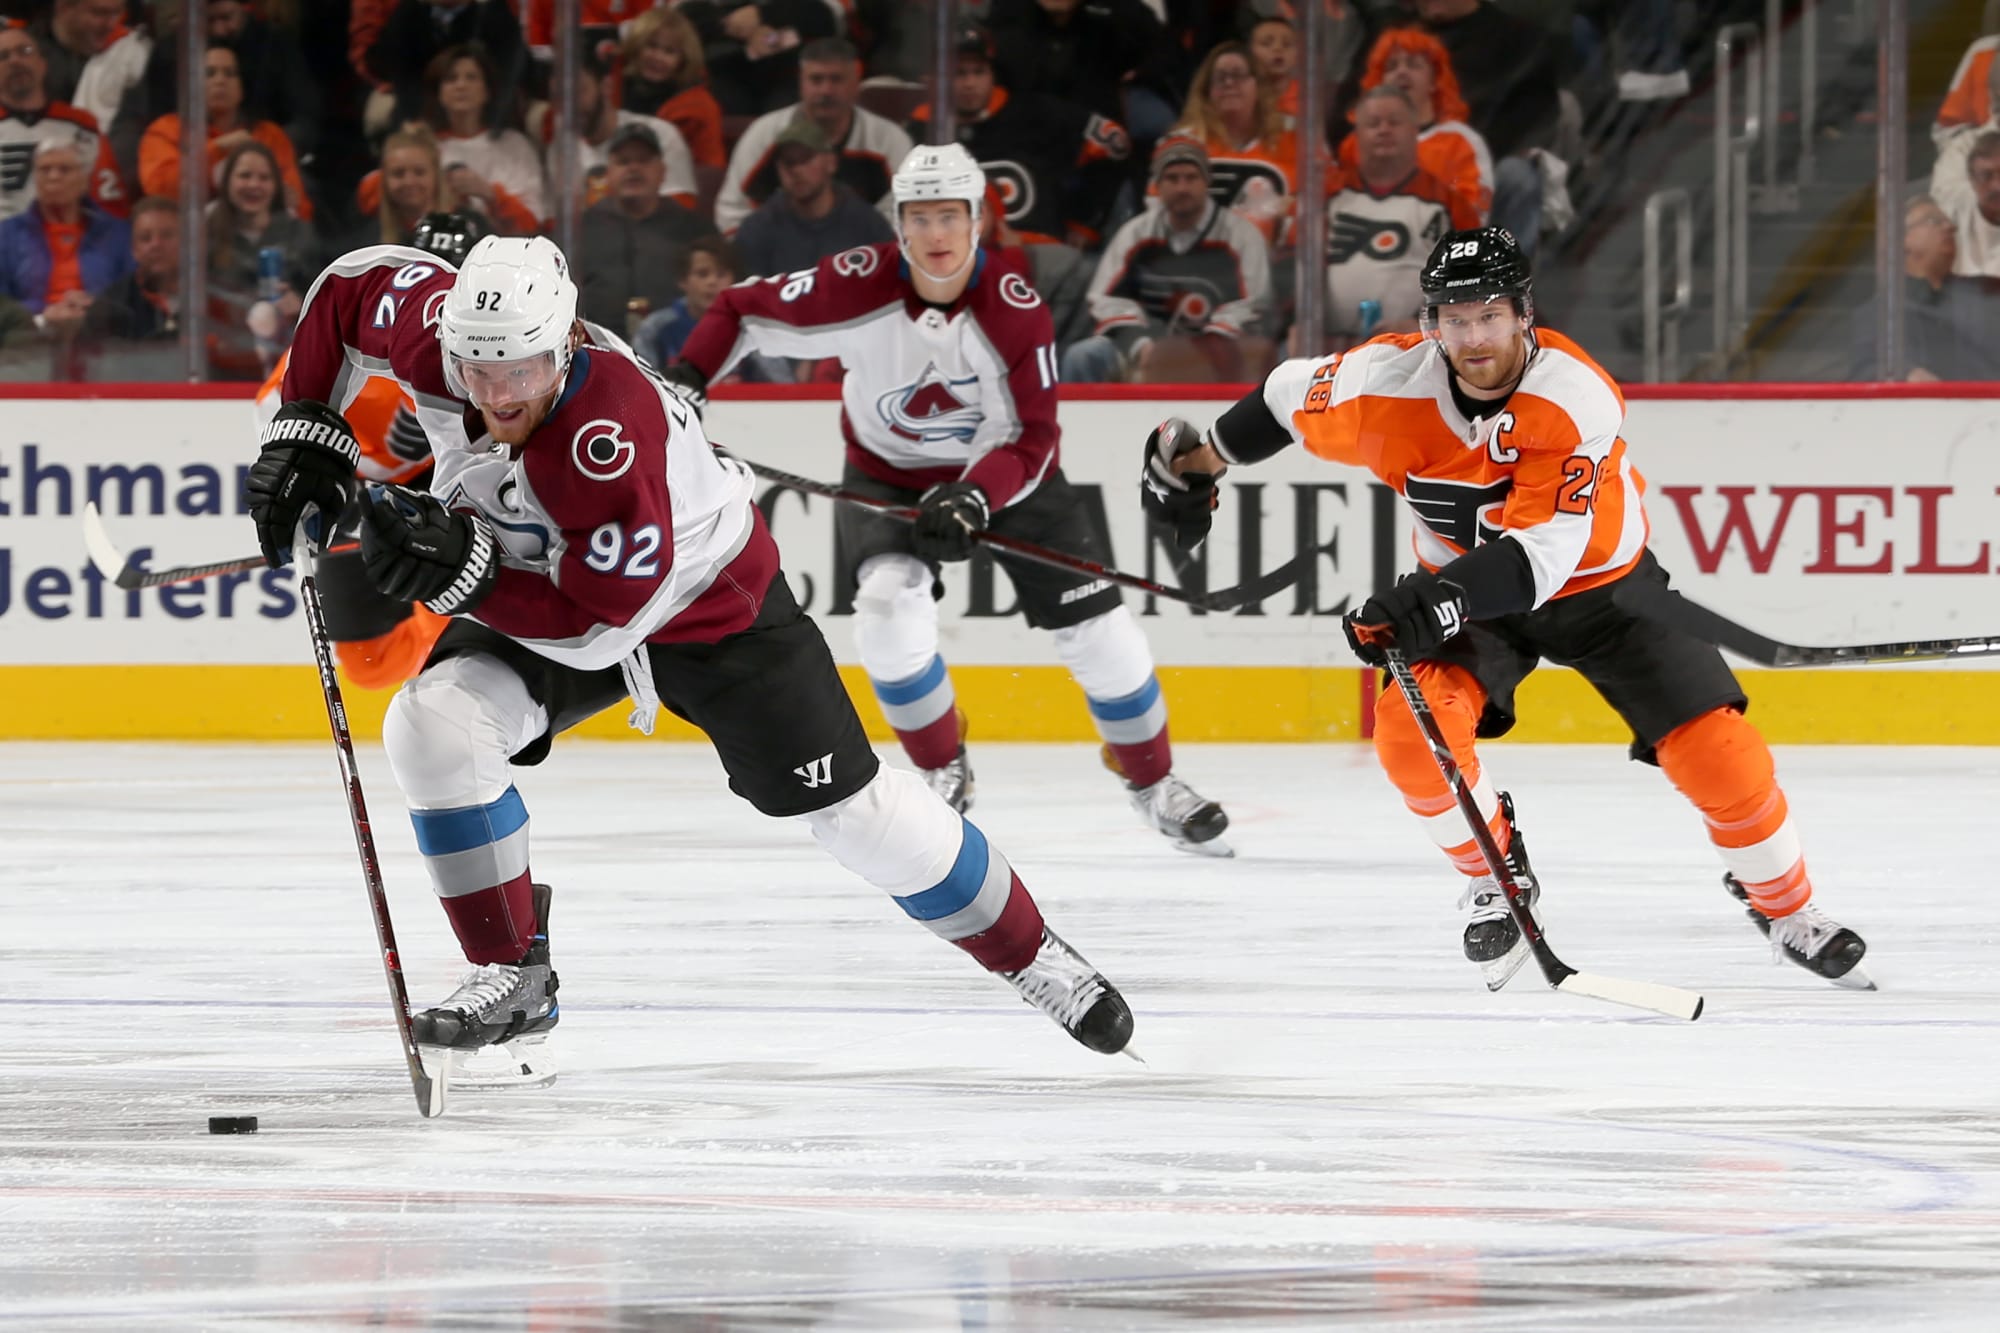 Colorado Avalanche Score 4 Beautiful Goals to Beat Flyers